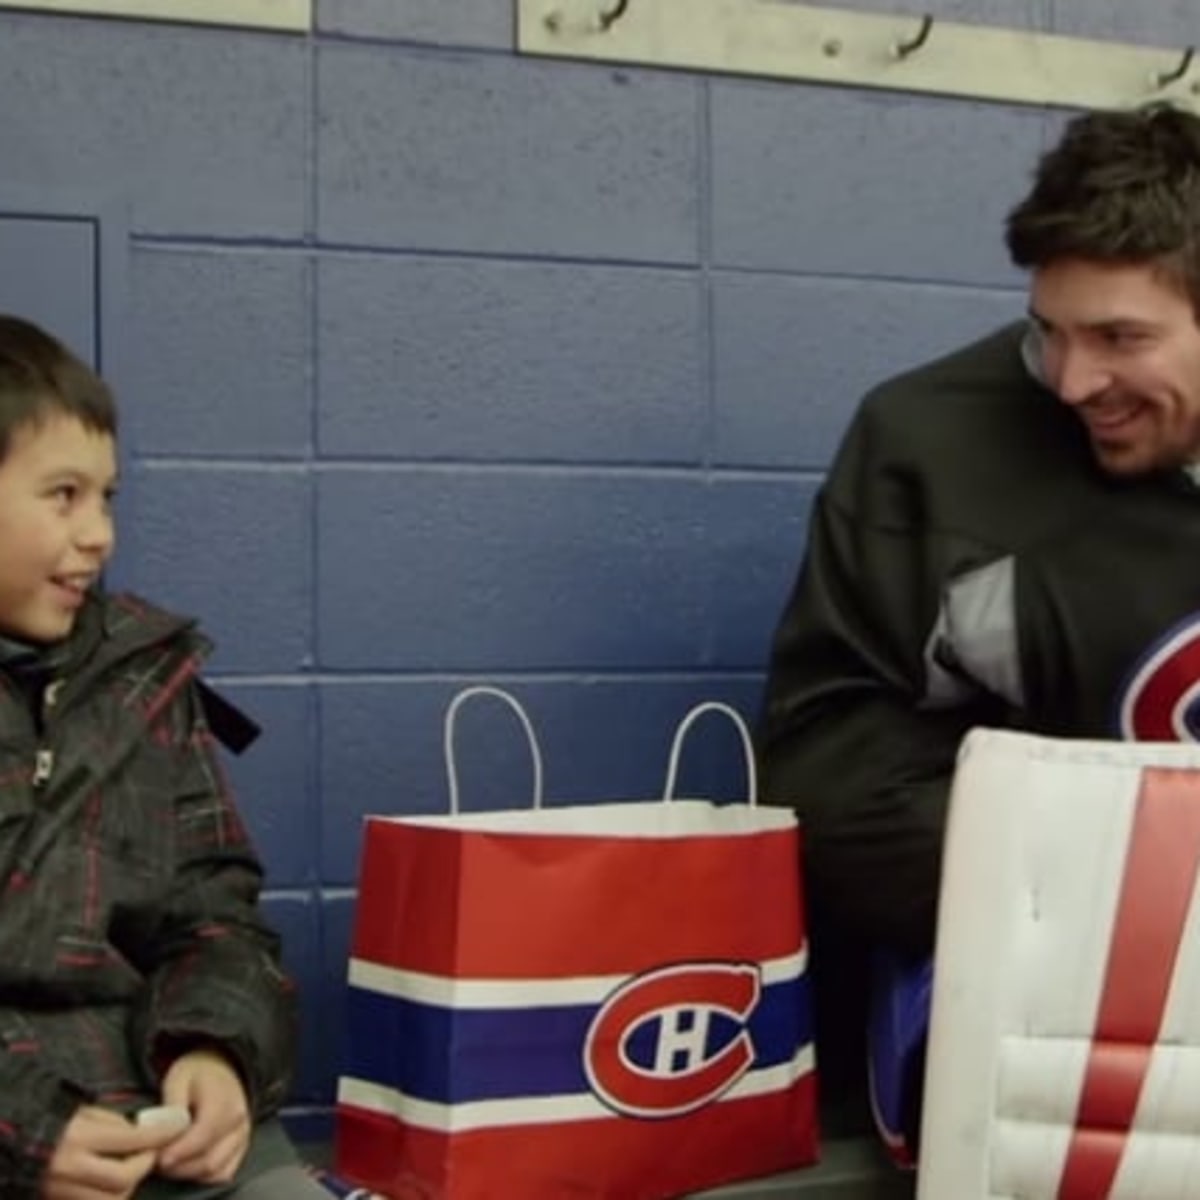 Are you the kid in the video?': Brantford boy surprised by Carey Price  reacts to newfound fame